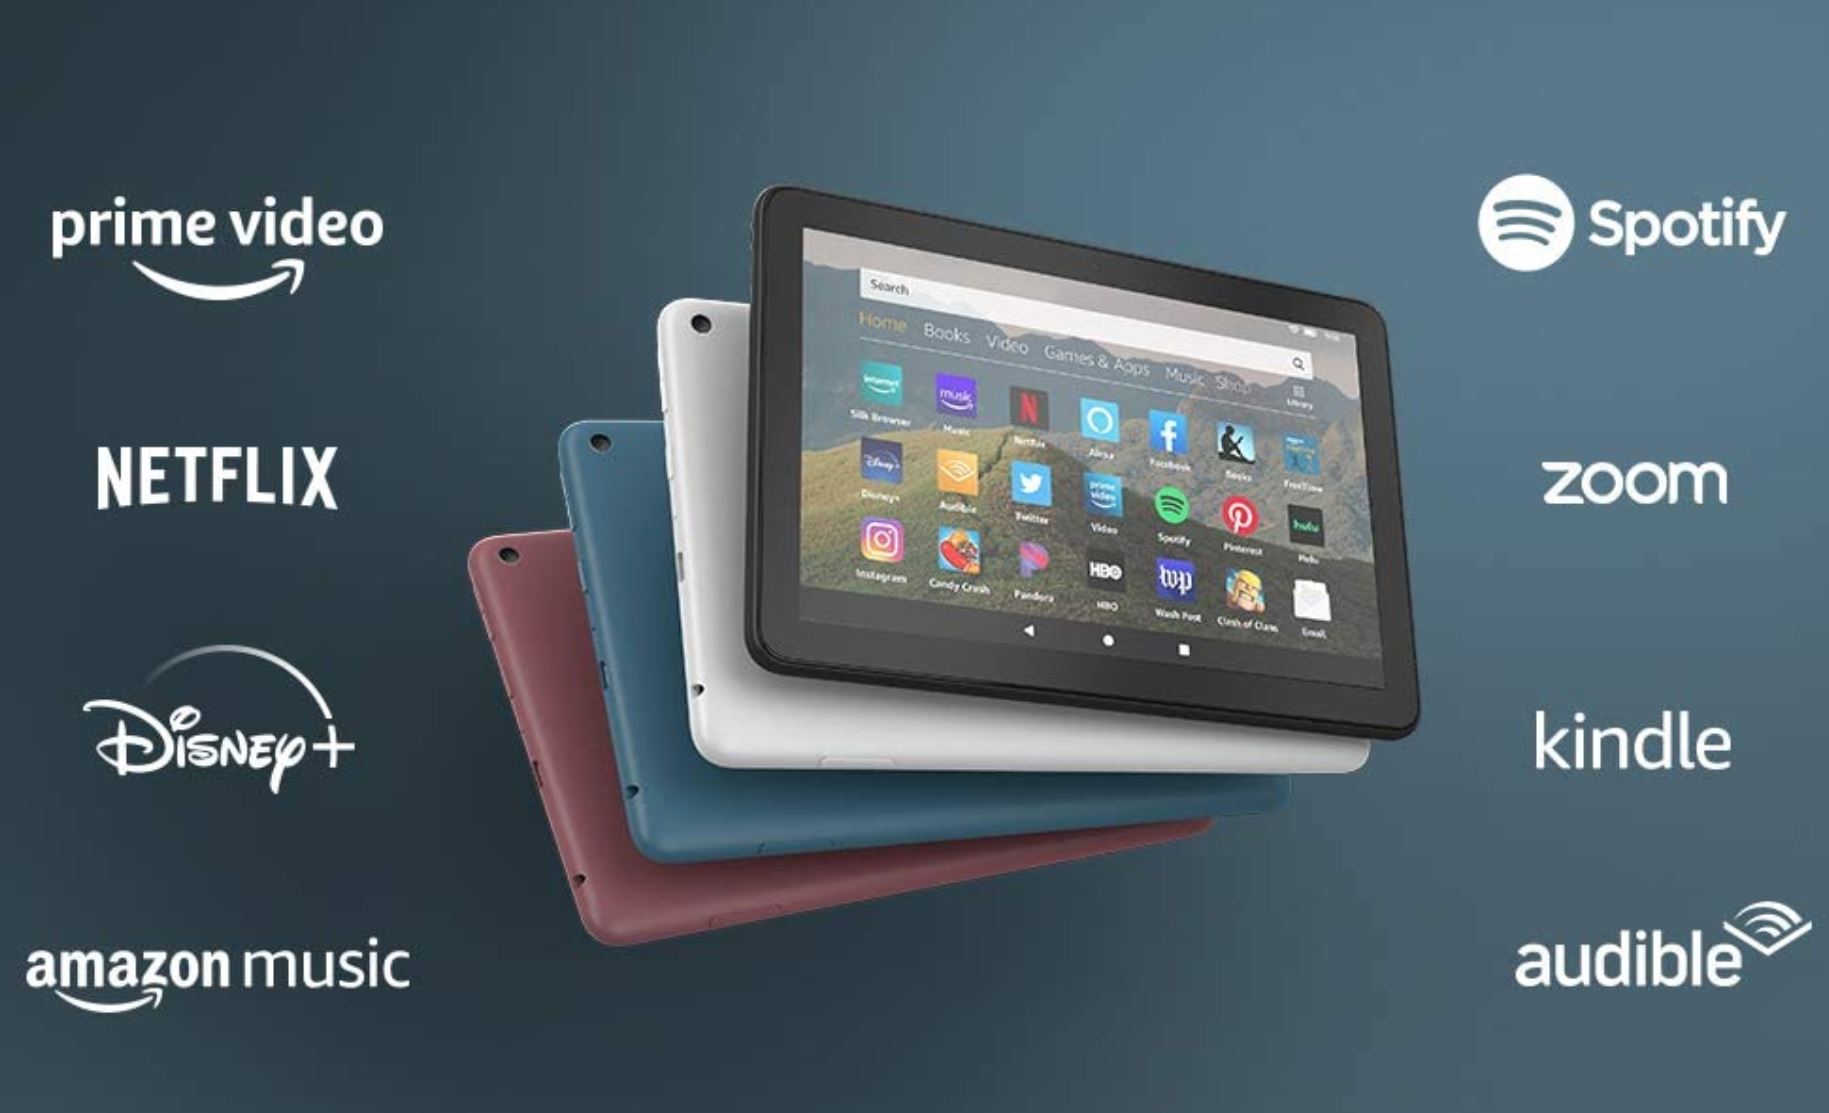 Amazon announces all-New Fire HD 8, Fire HD 8 Plus, and Fire HD 8 Kids Edition tablets